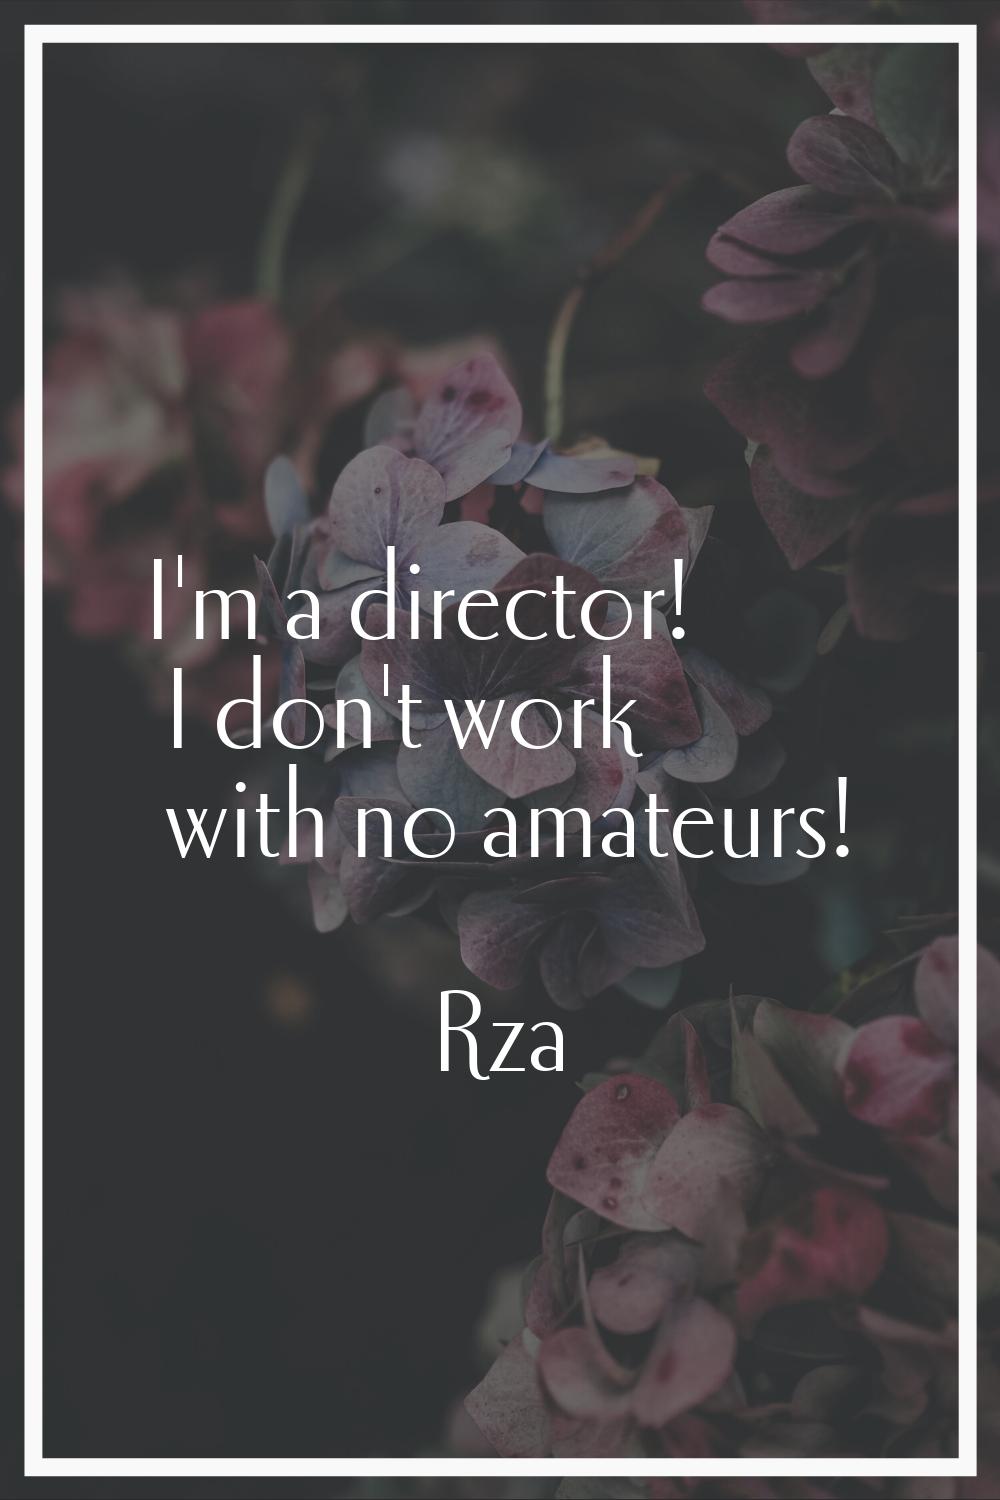 I'm a director! I don't work with no amateurs!